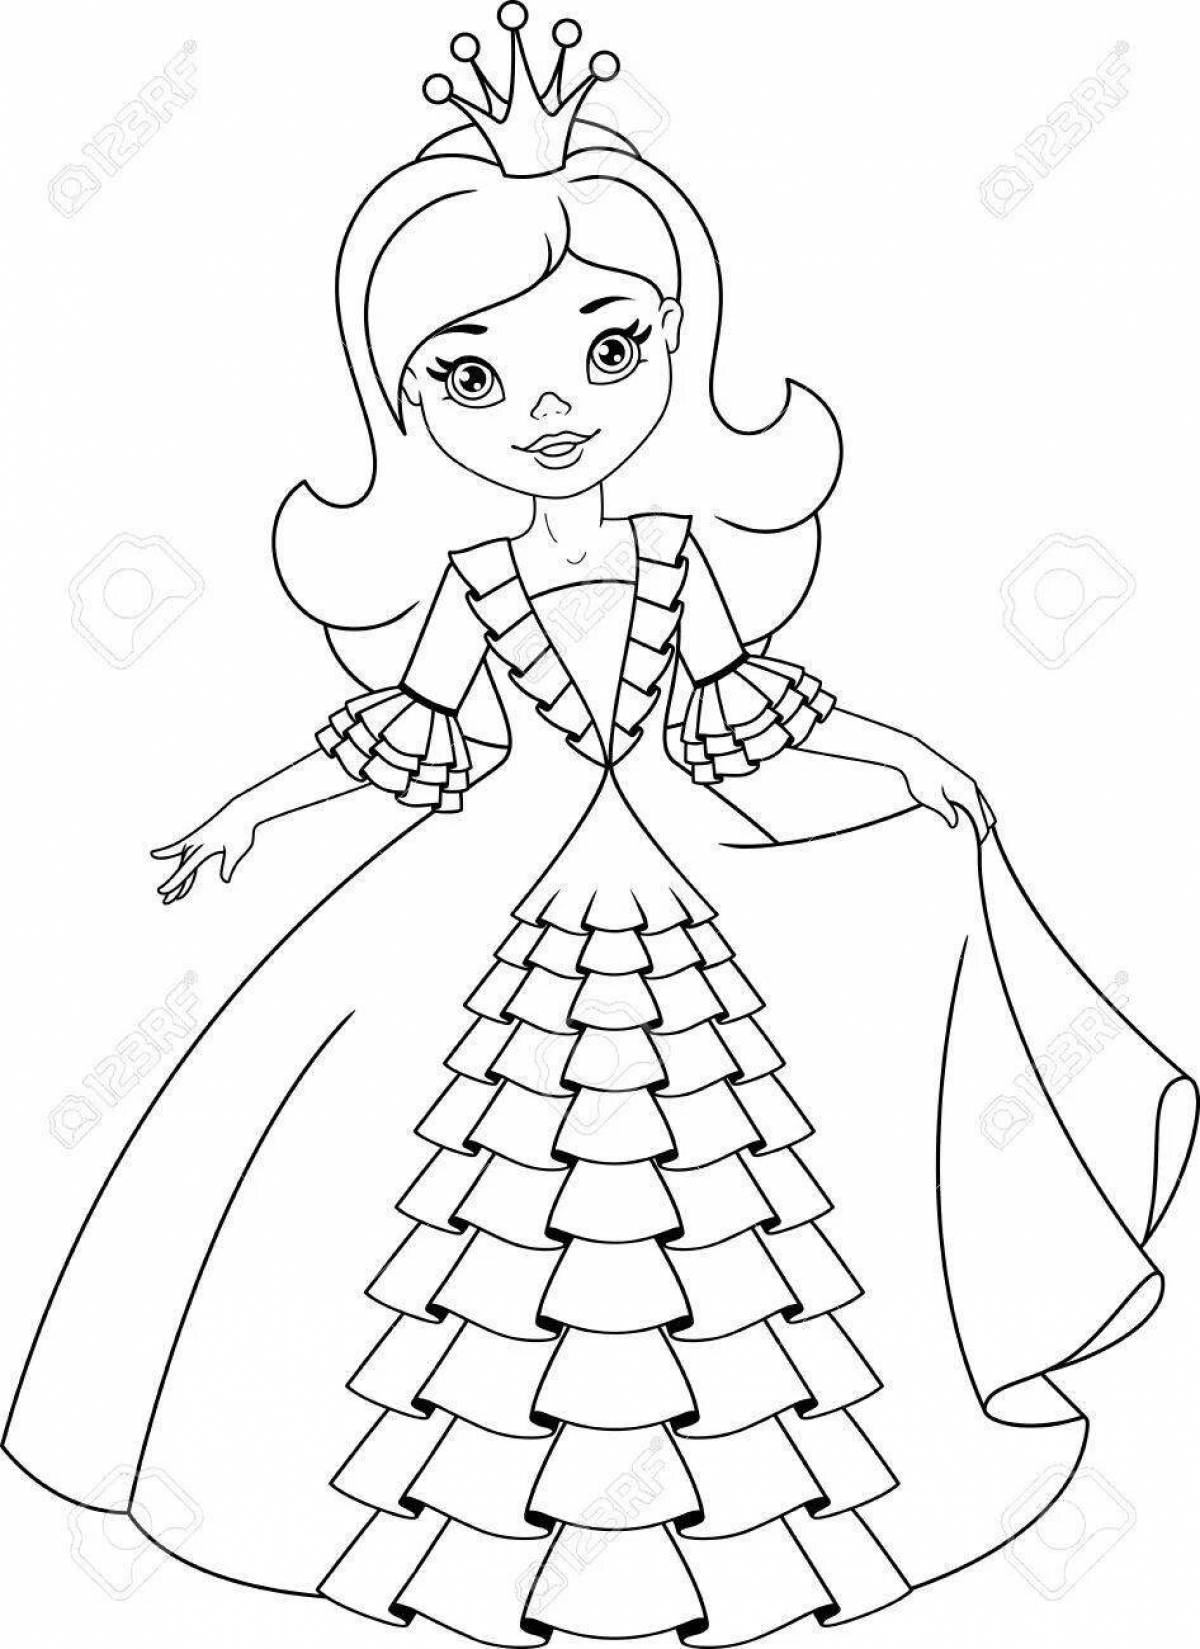 Dazzling coloring page turn on princesses